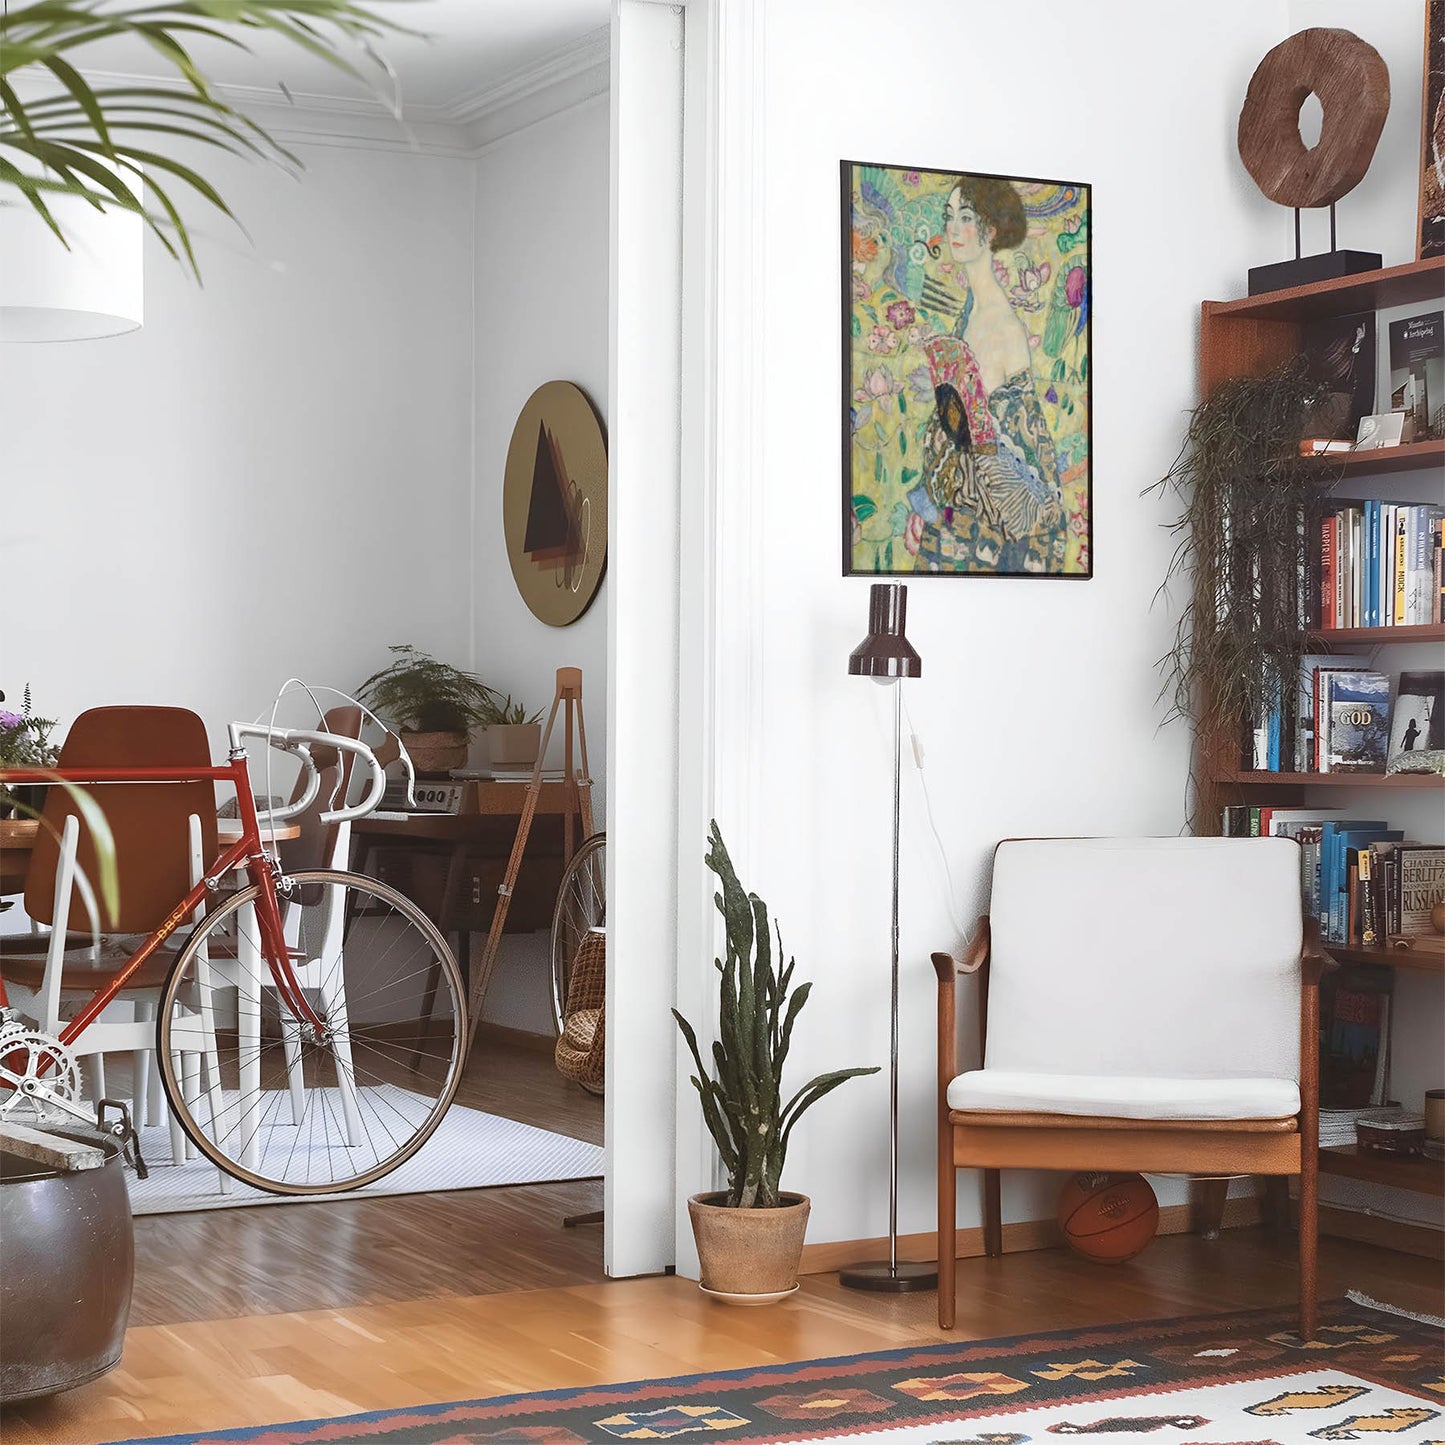 Eclectic living room with a road bike, bookshelf and house plants that features framed artwork of a Light and Floral above a chair and lamp